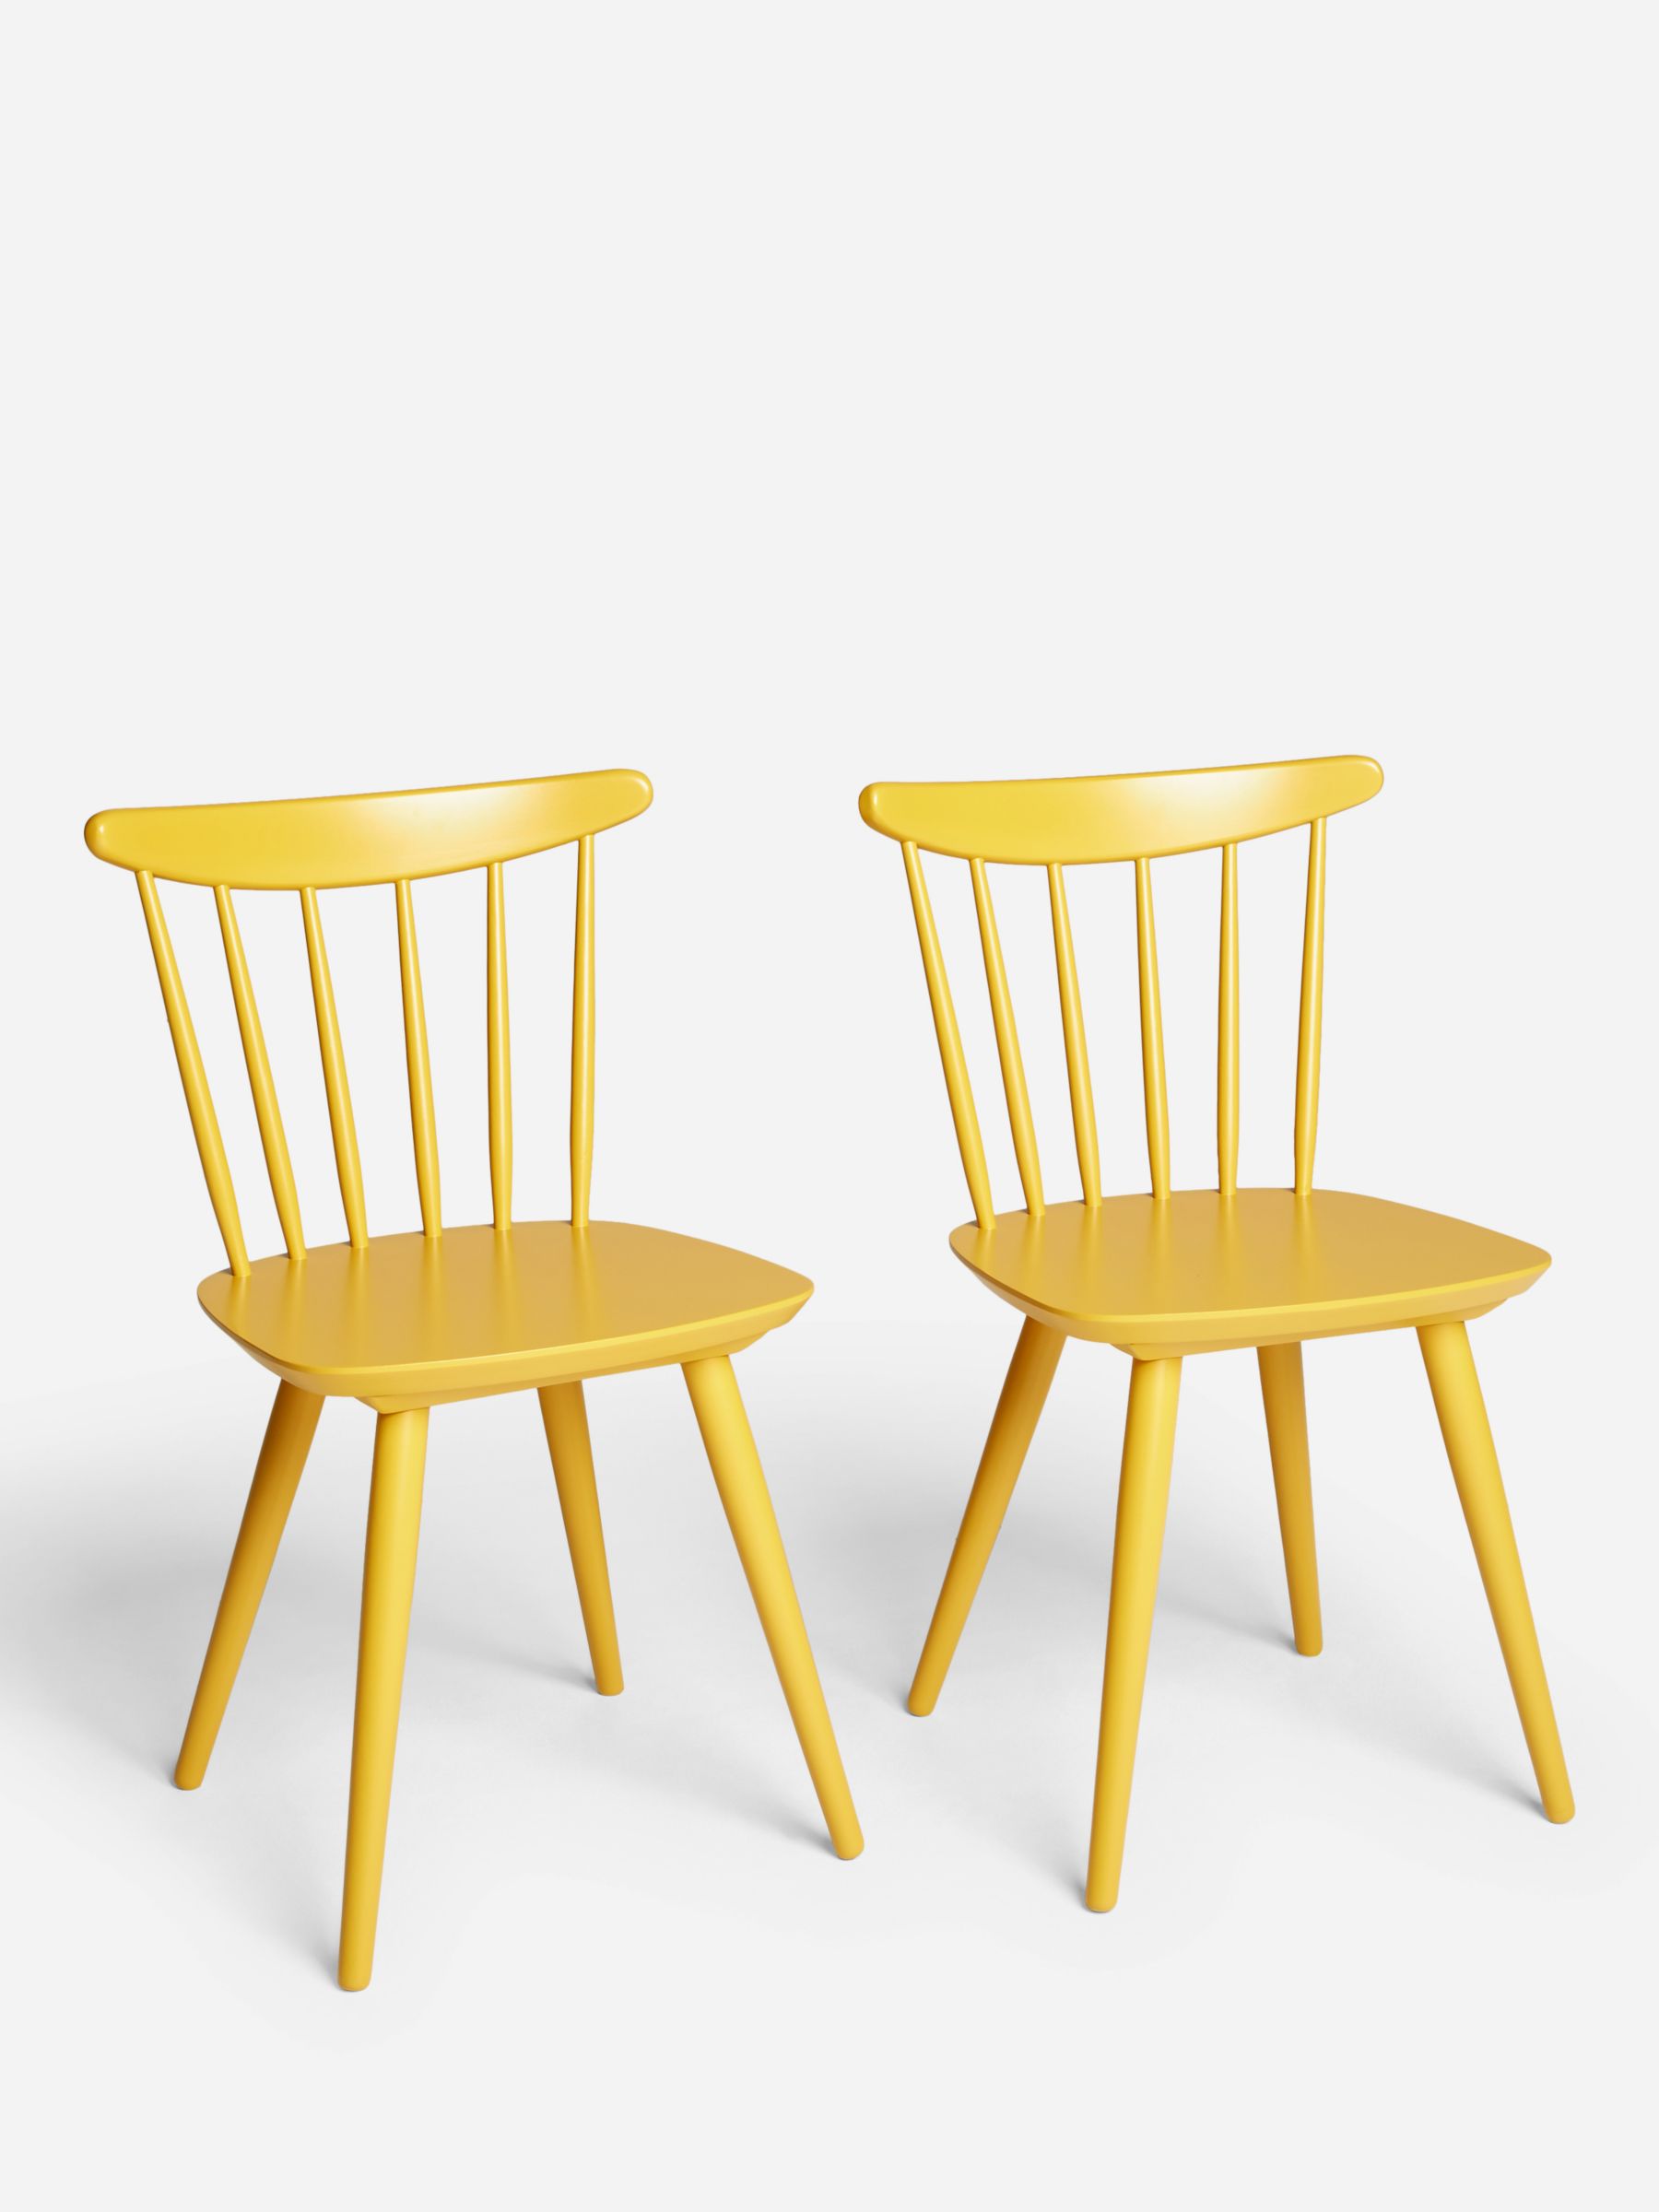 ANYDAY John Lewis & Partners Spindle Dining Chair, Set of 2, FSC